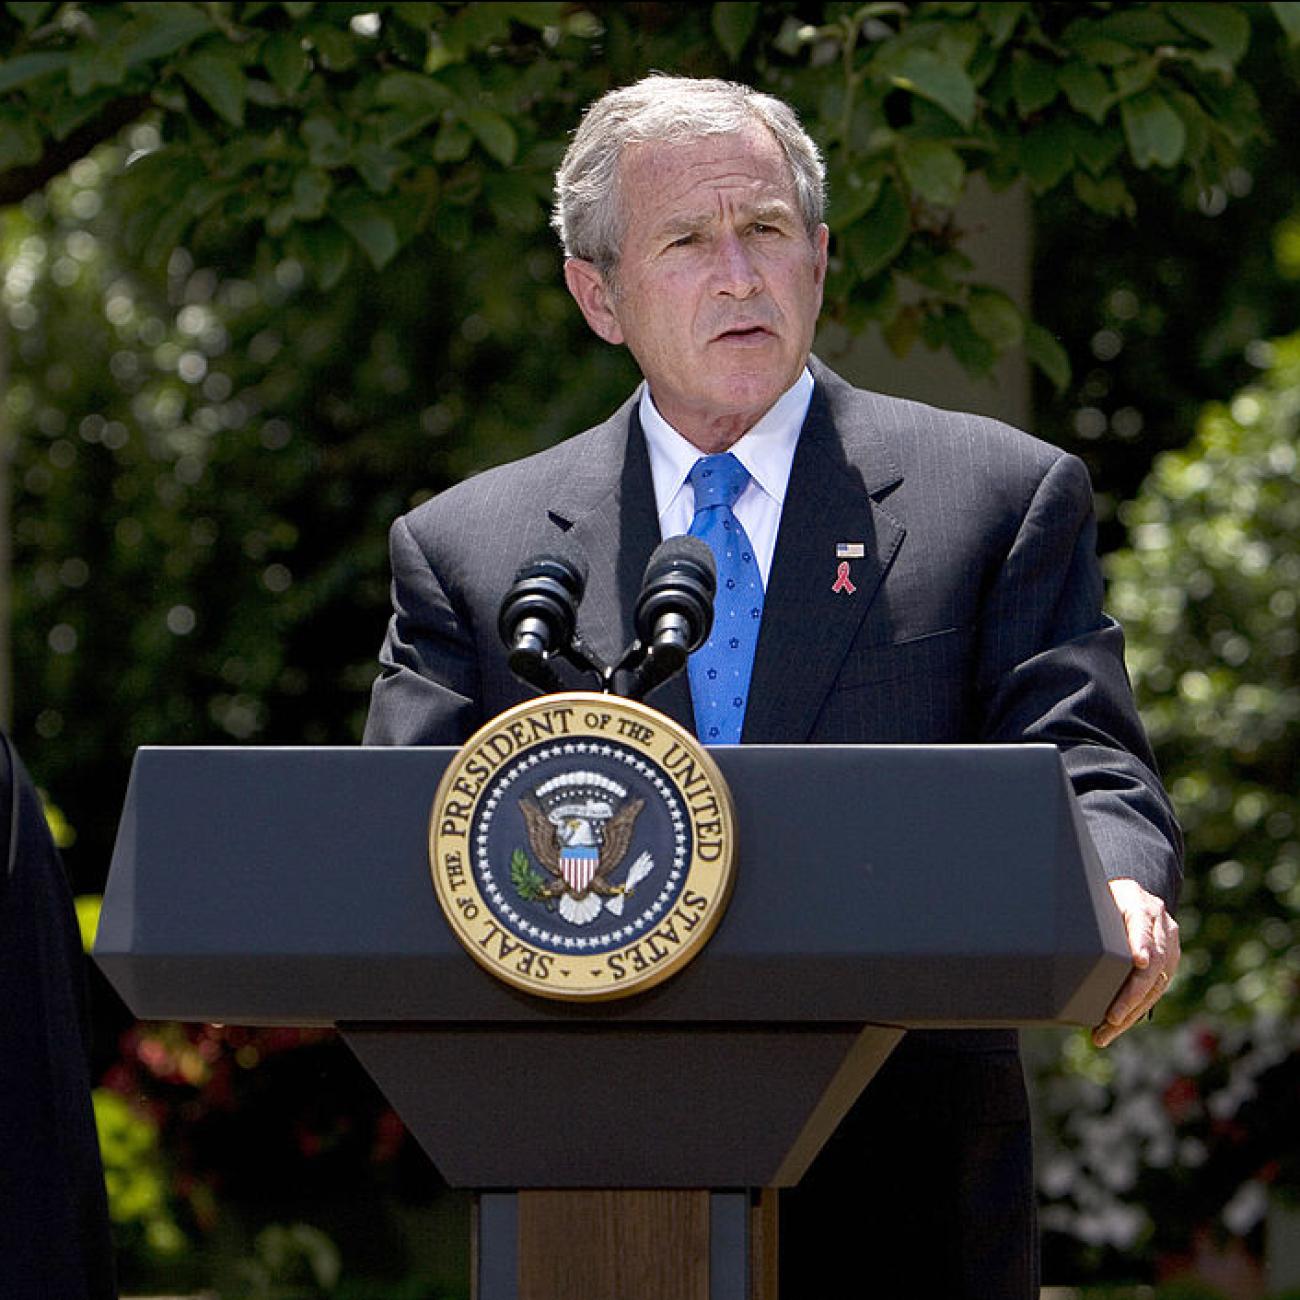 US President George W. Bush speaks on the President's Emergency Plan for AIDS Relief as Bishop Paul Yowakim looks on 30 May 2007 in the Rose Garden of the White House in Washington, DC.